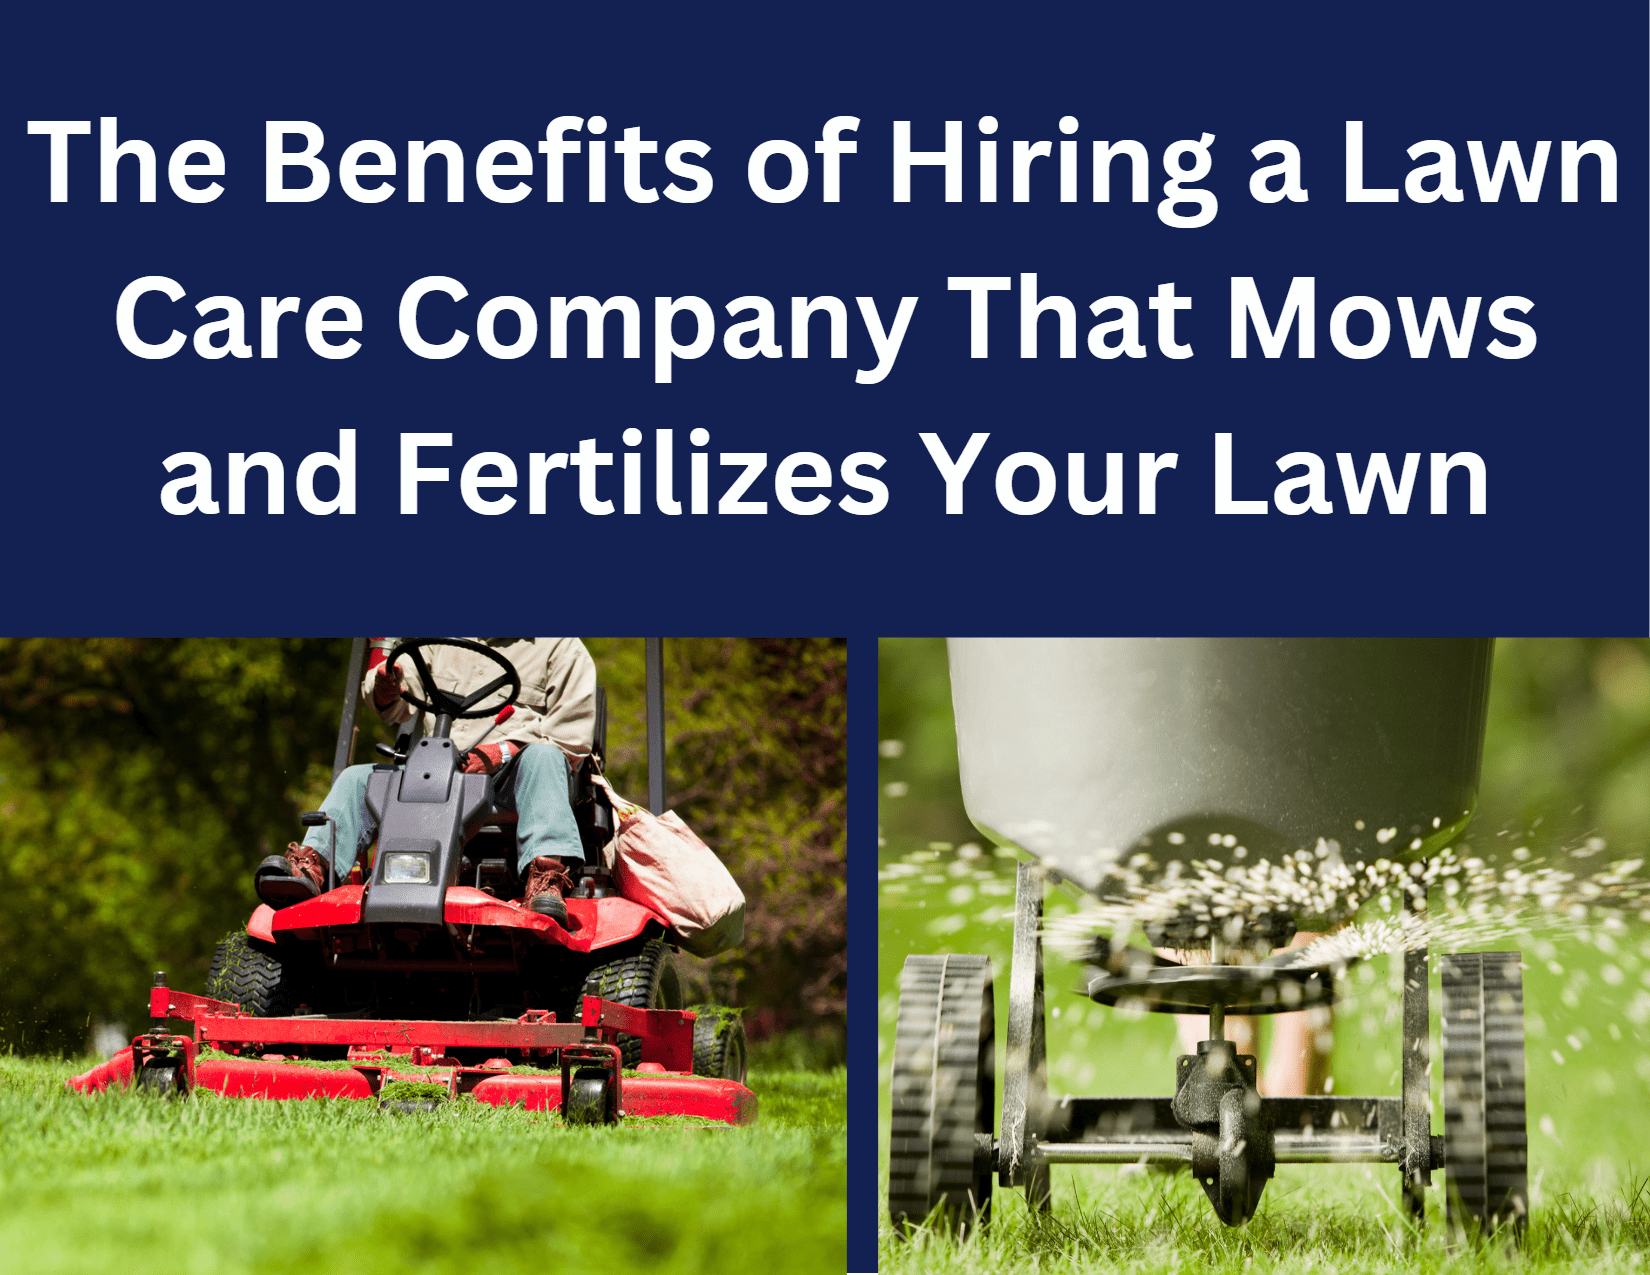 Lawn Care Made Easy: Hire a Company for Mowing and Fertilization